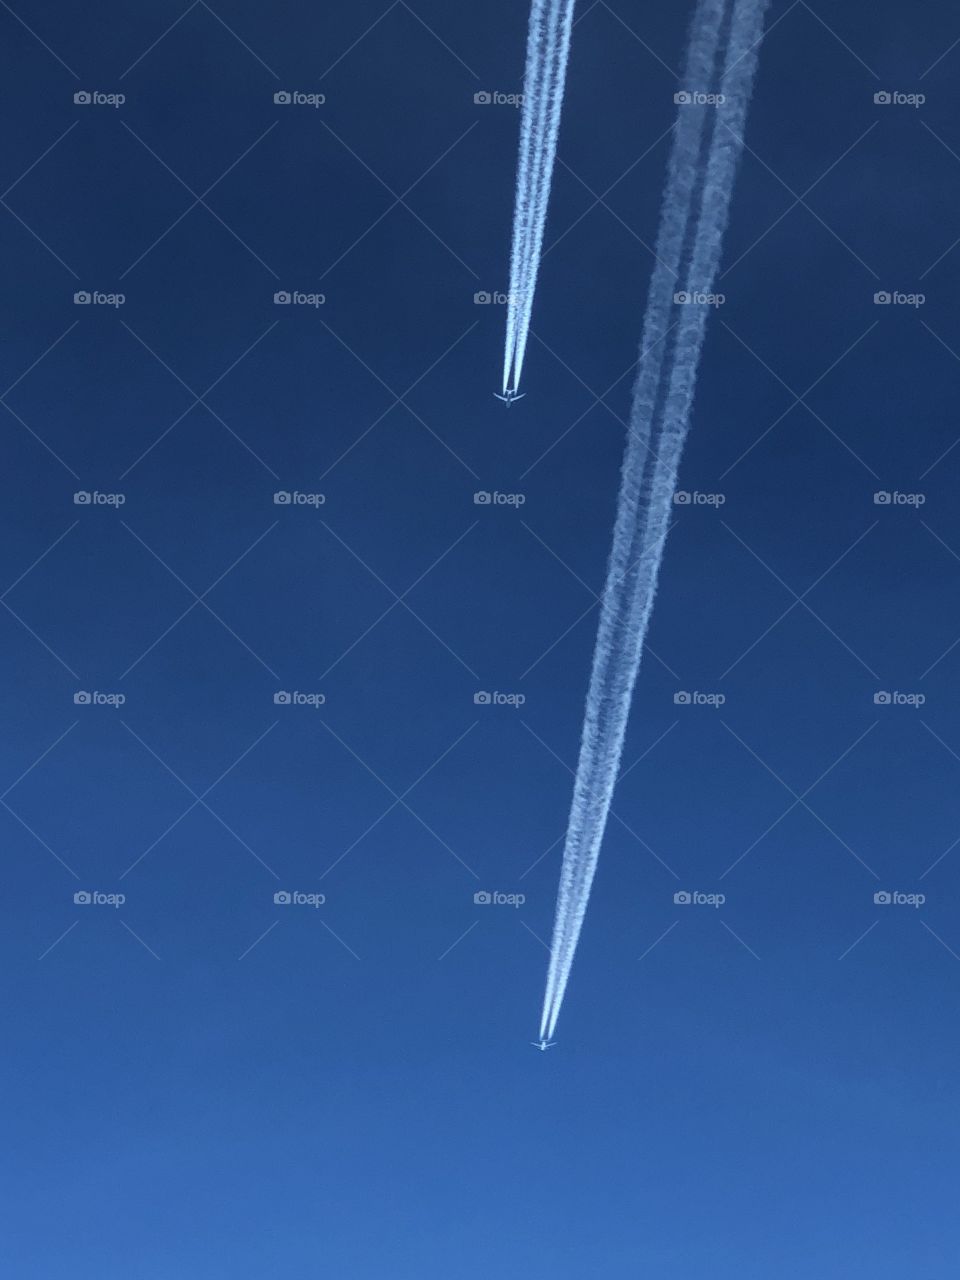 Twin Contrails 